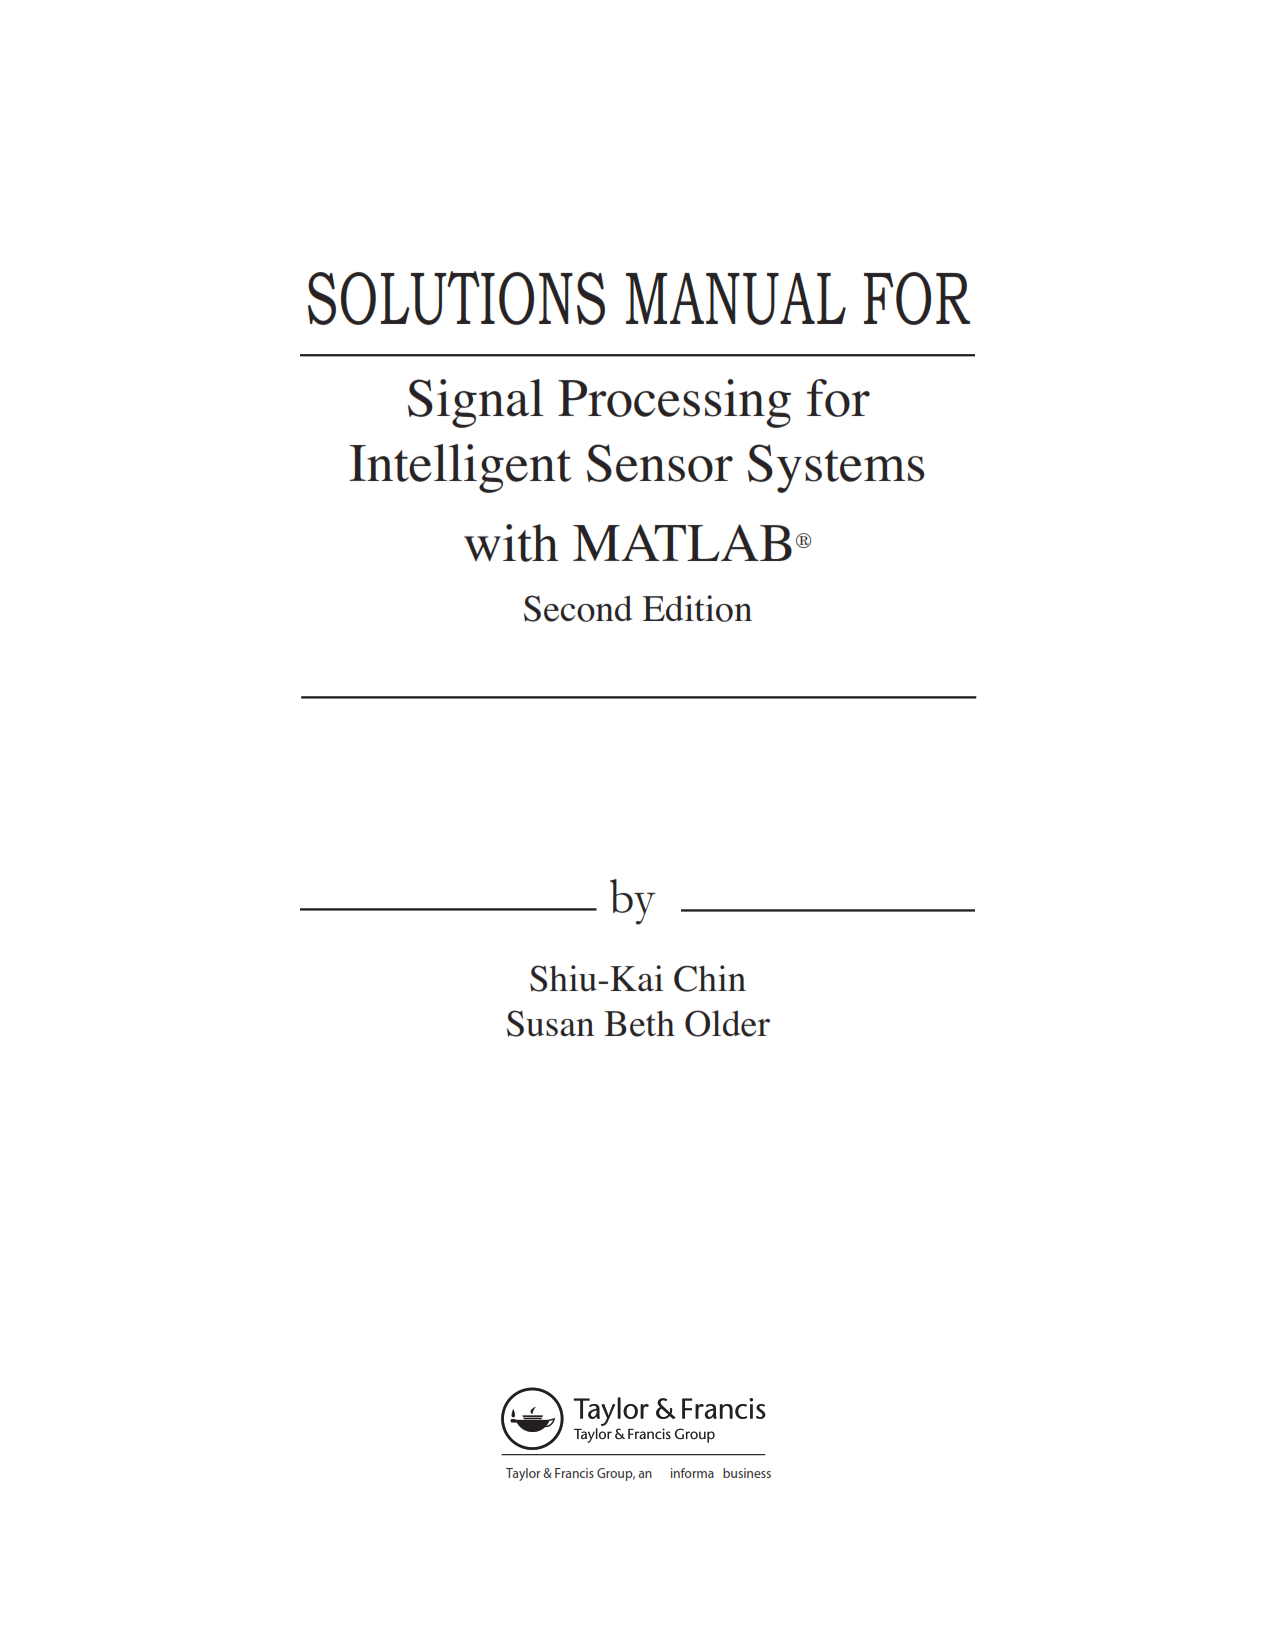 Download free Solution manual of Signal Processing for Intelligent Sensor Systems with MATLAB 2nd edition by David C. Swanson pdf | solutions